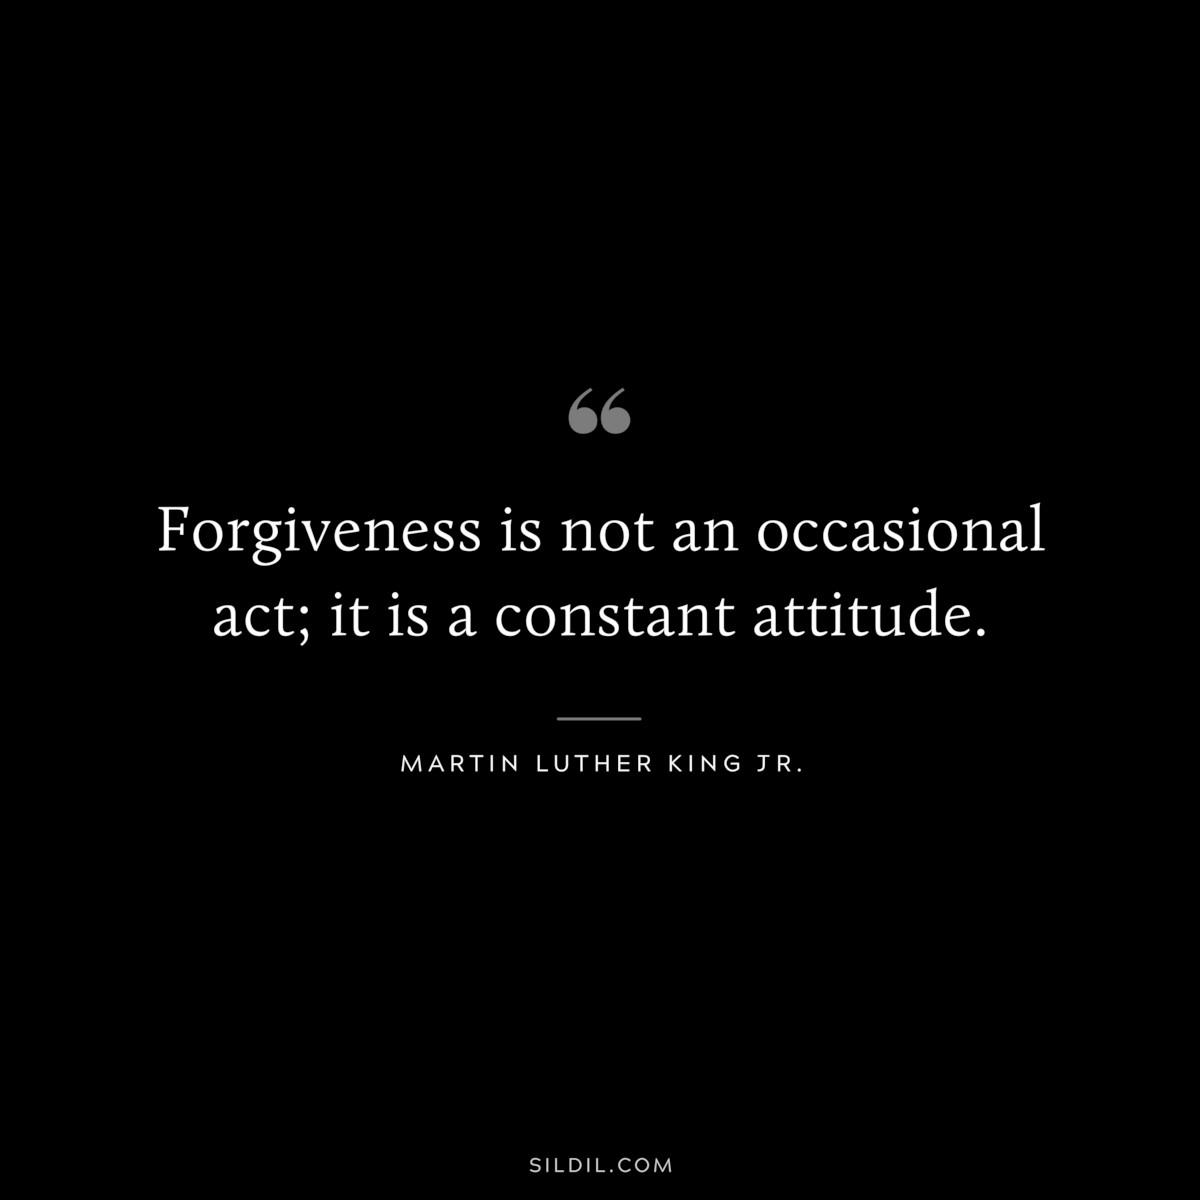 Forgiveness is not an occasional act; it is a constant attitude. ― Martin Luther King Jr.